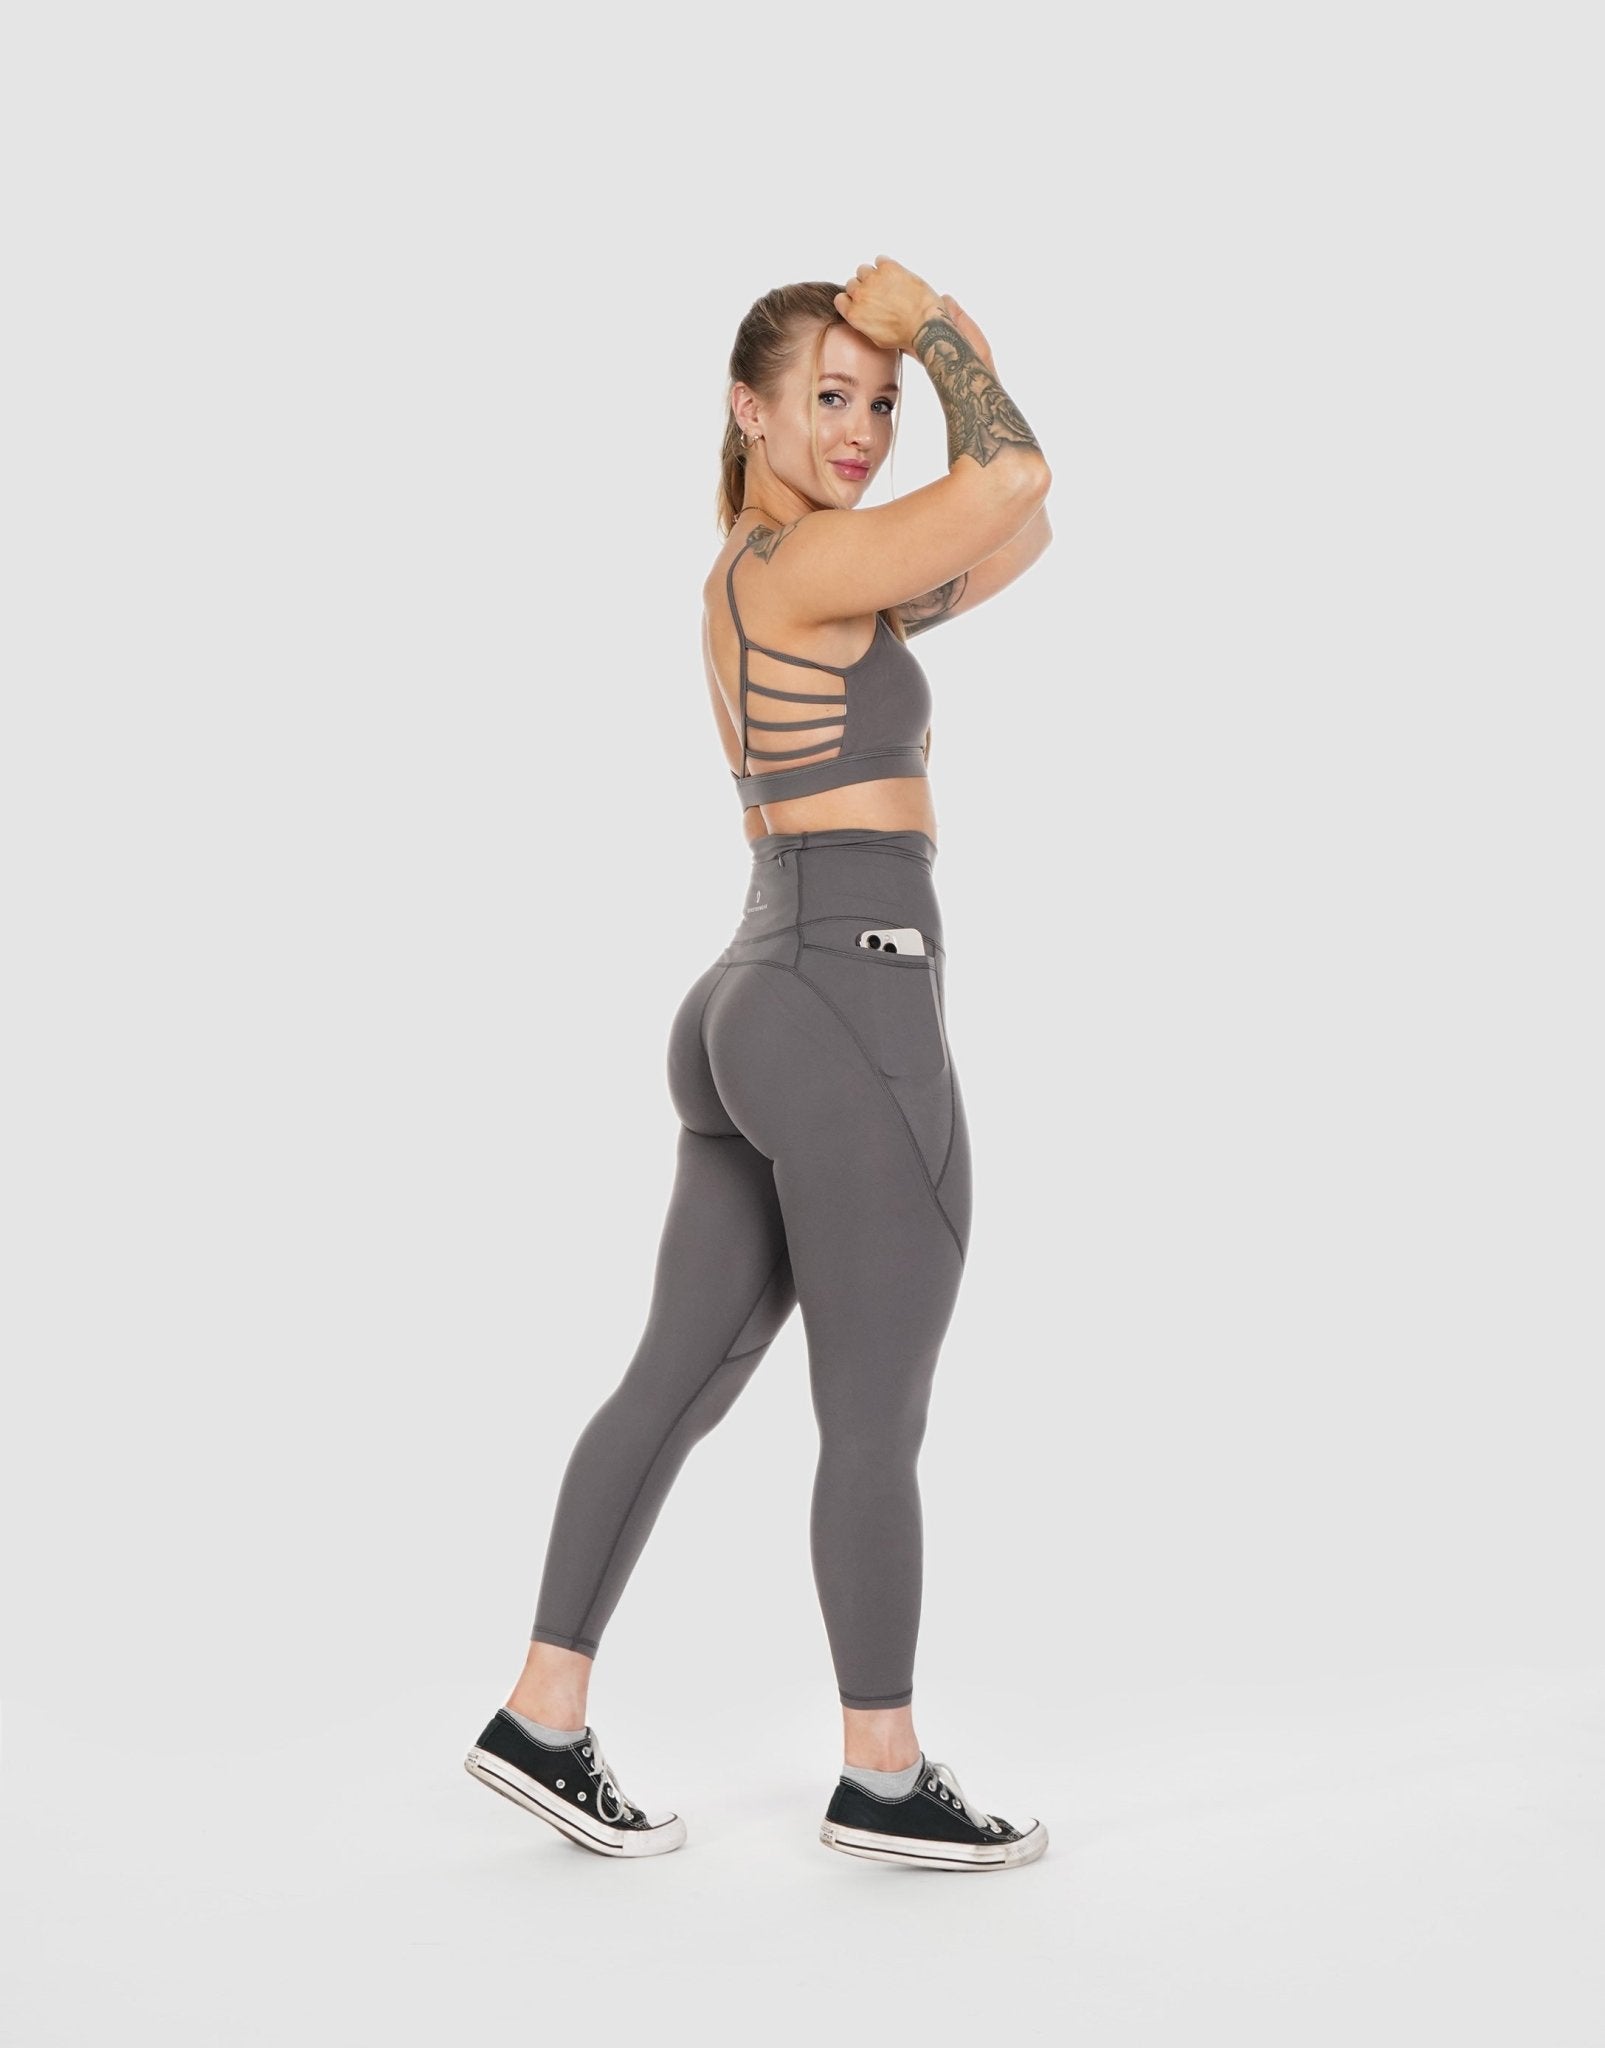 Scrunch Butt Leggings With Flap Pockets , Gym and Active Leggings for Women  , Yoga Pants , Light Blue Leggings , Pocket Leggings, Fit Wear -   Singapore